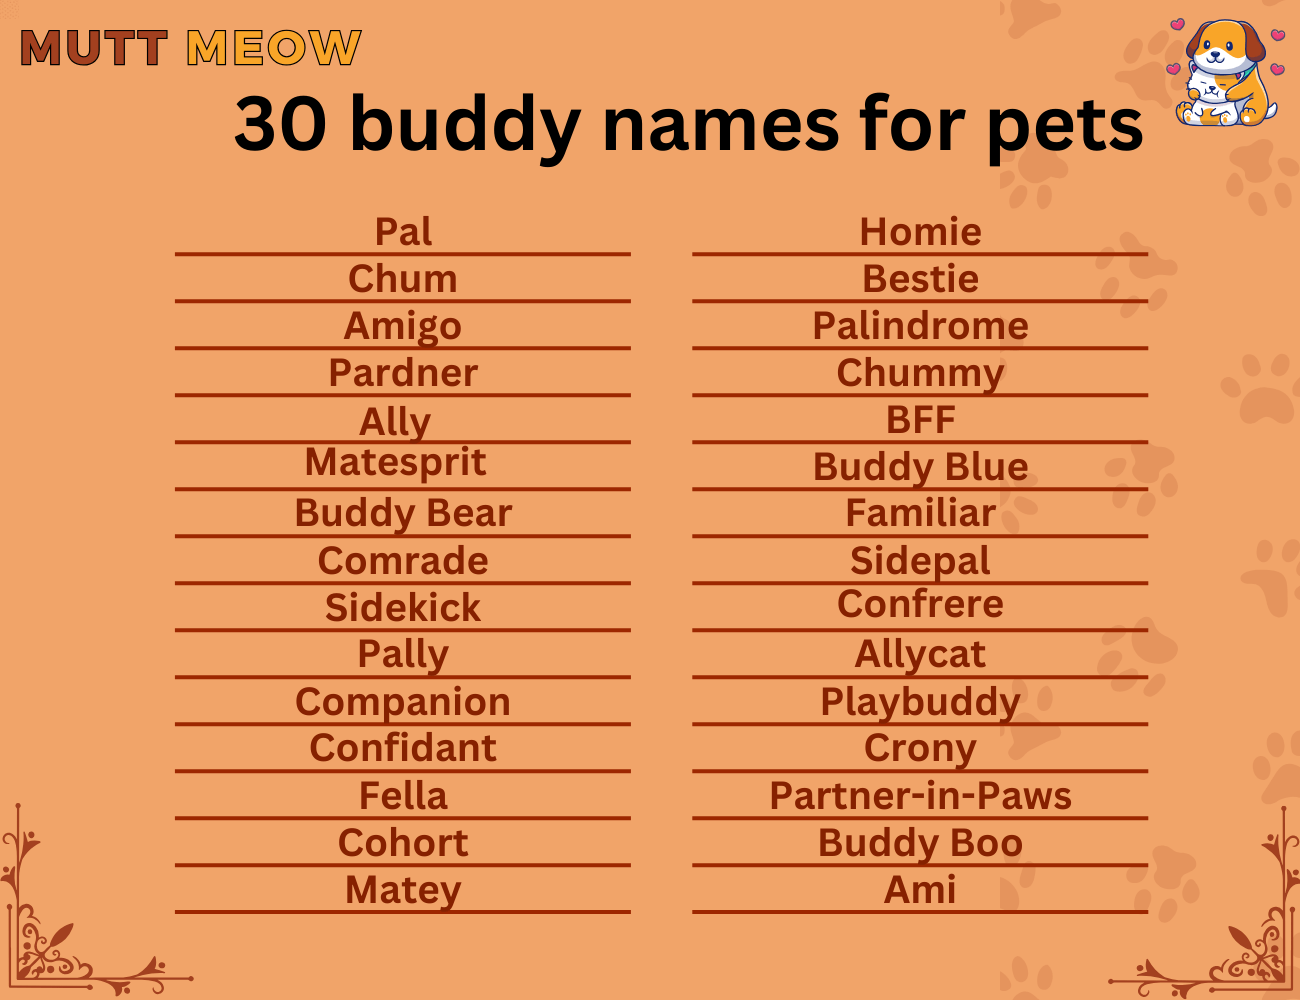 30 Buddy Names For Pets